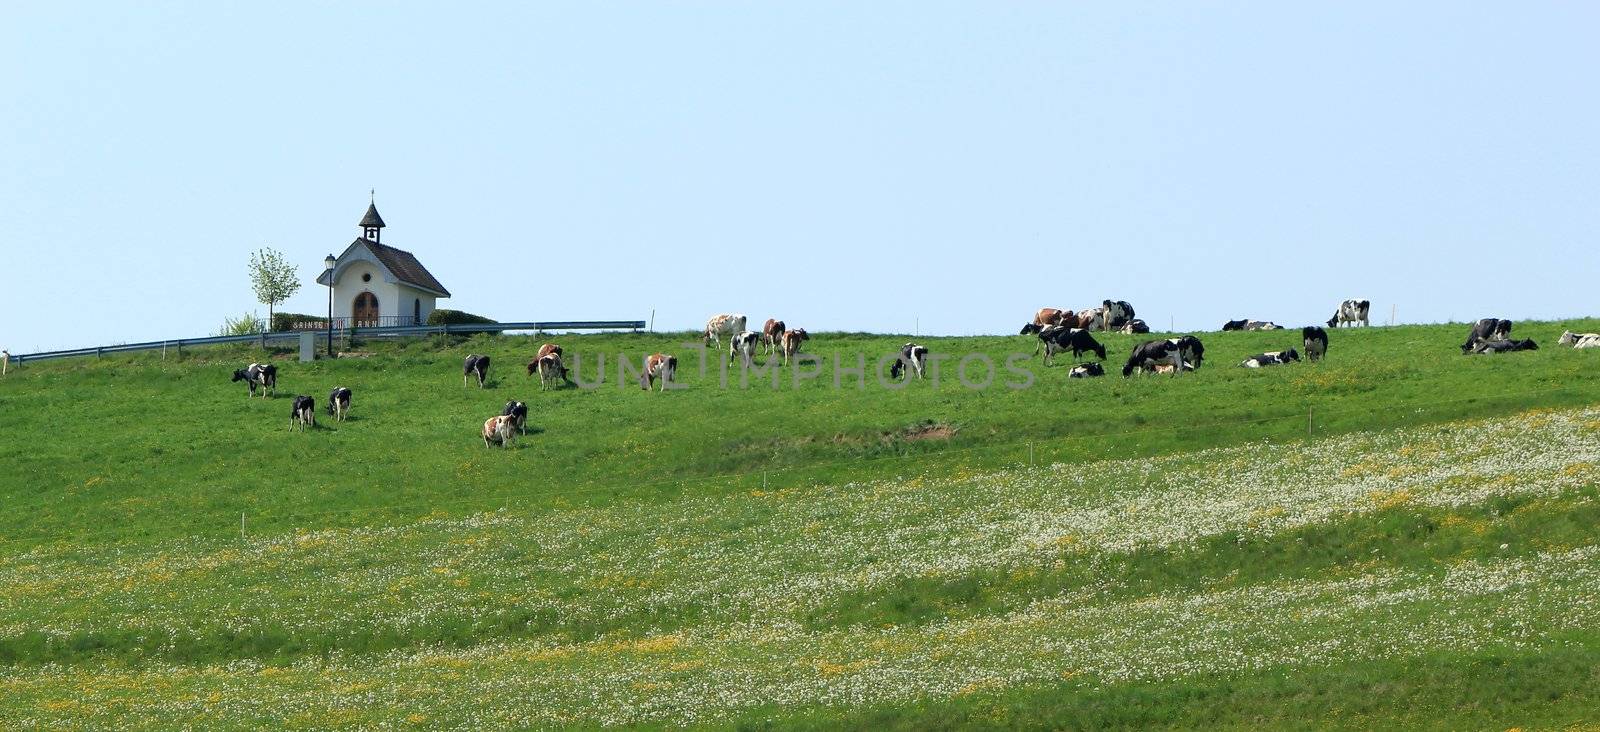 Herd of cows next to a small chapel in a meadow on a hill